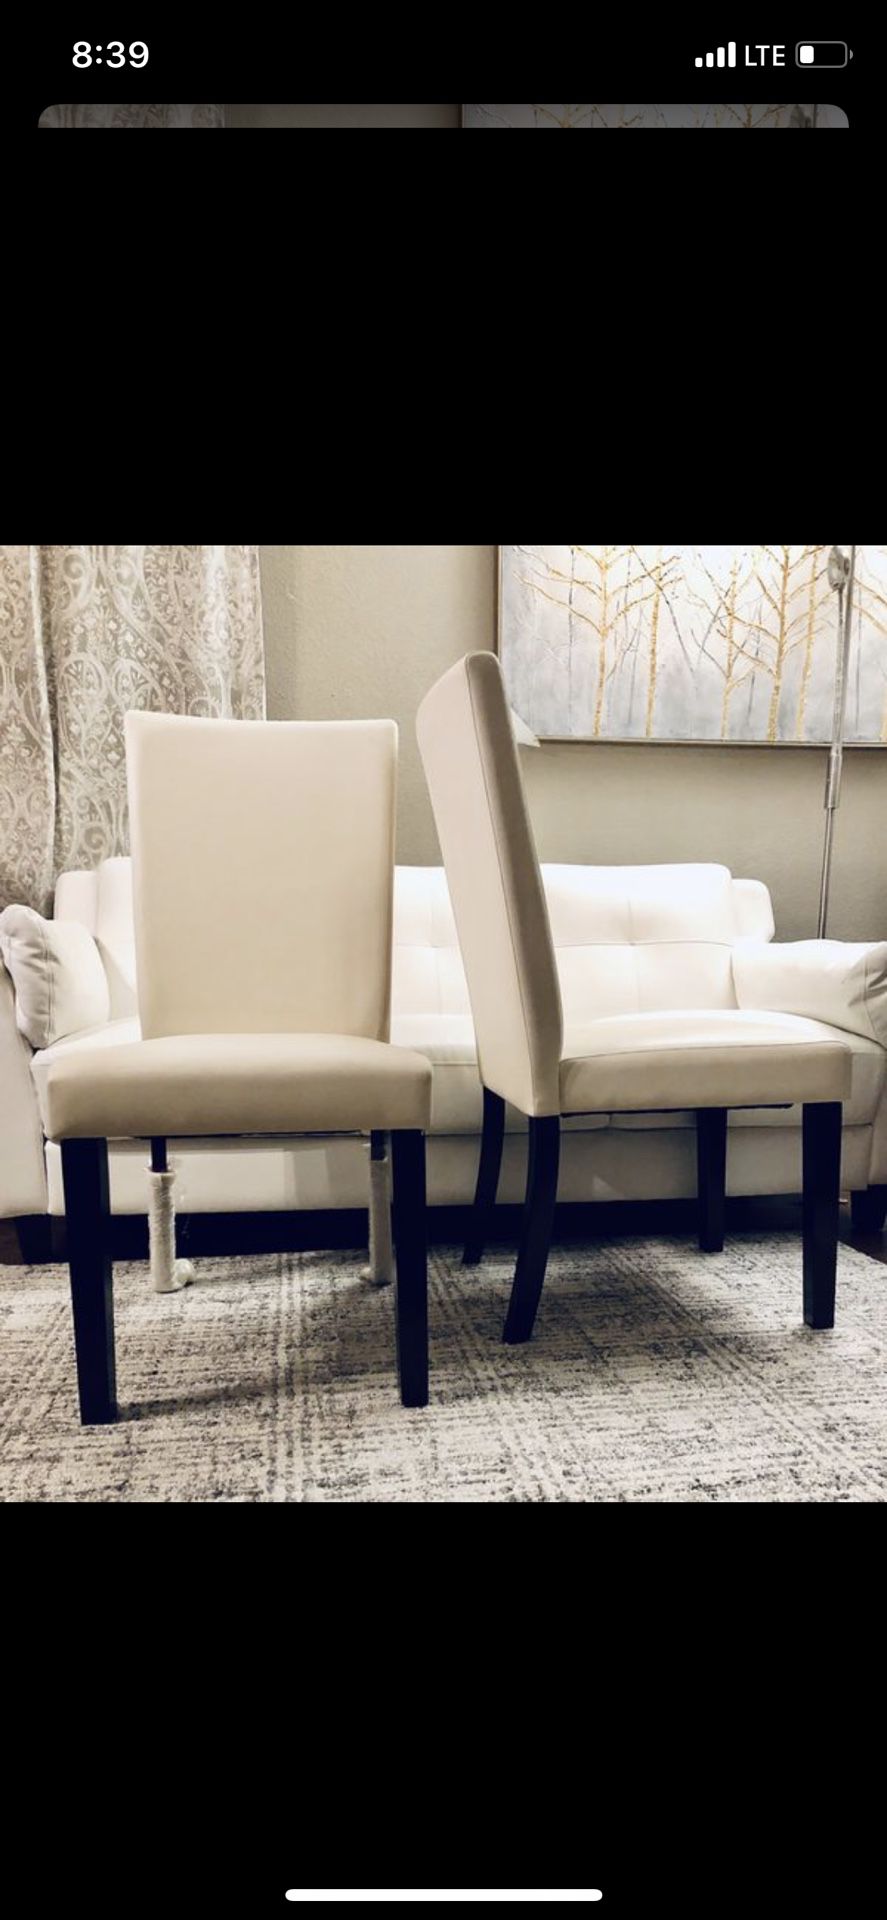 ⭐️New Corliving Atwood cream leatherette dining chair Set. P/U by ASHLAN AND TEMPERANCE IN CLOVIS